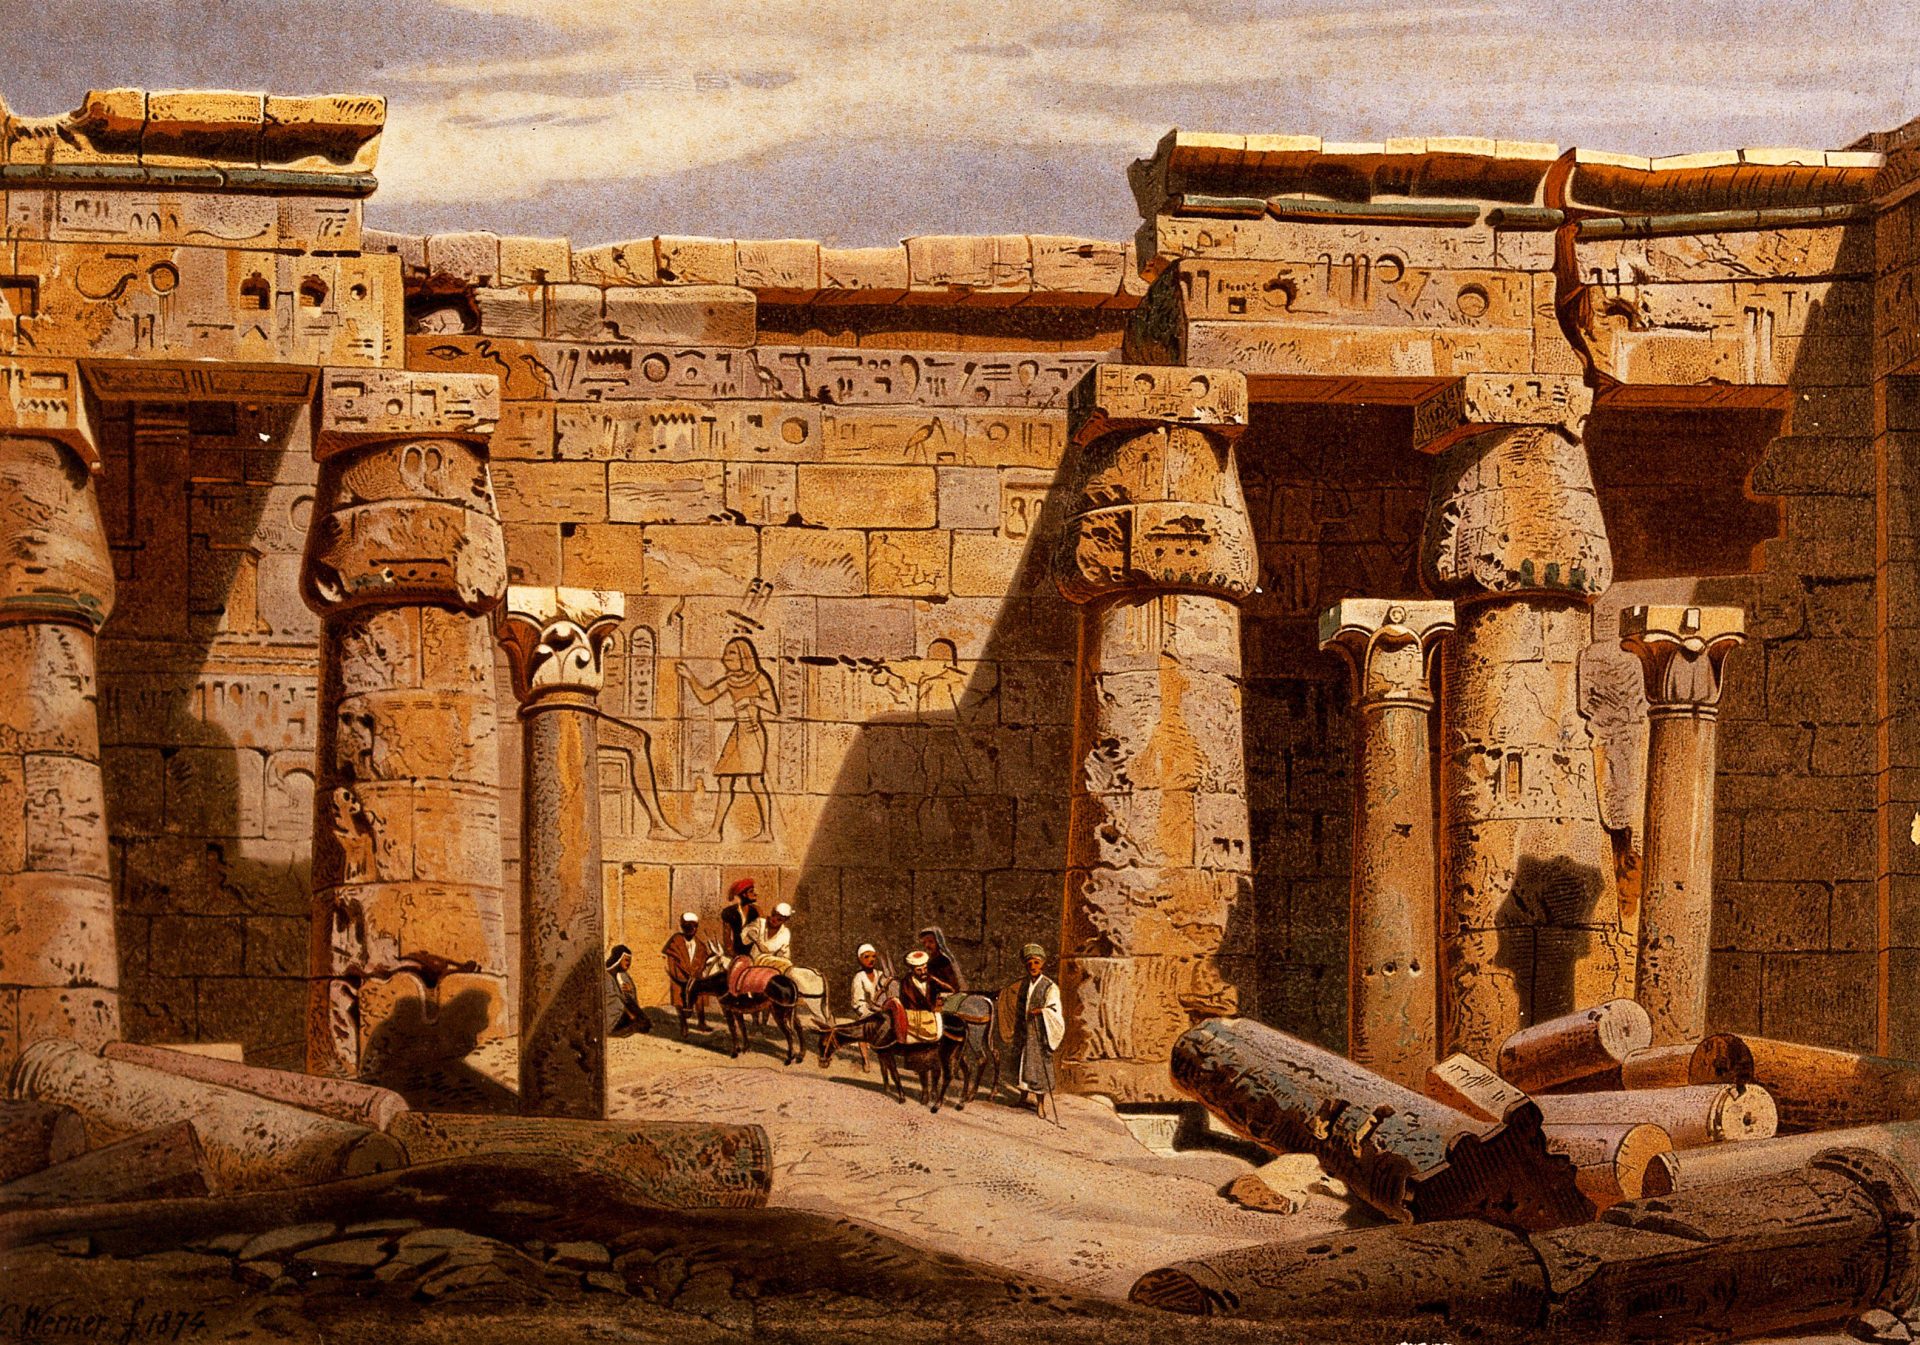 An intricately detailed color lithograph depicting the court of the Medinet-Habu temple in Egypt, showcasing towering pillars adorned with hieroglyphics and carvings. A small group of people, some on horseback, gather in the foreground. The artwork is by G.W. Seitz from around 1878, based on an original by Carl Werner in 1874.